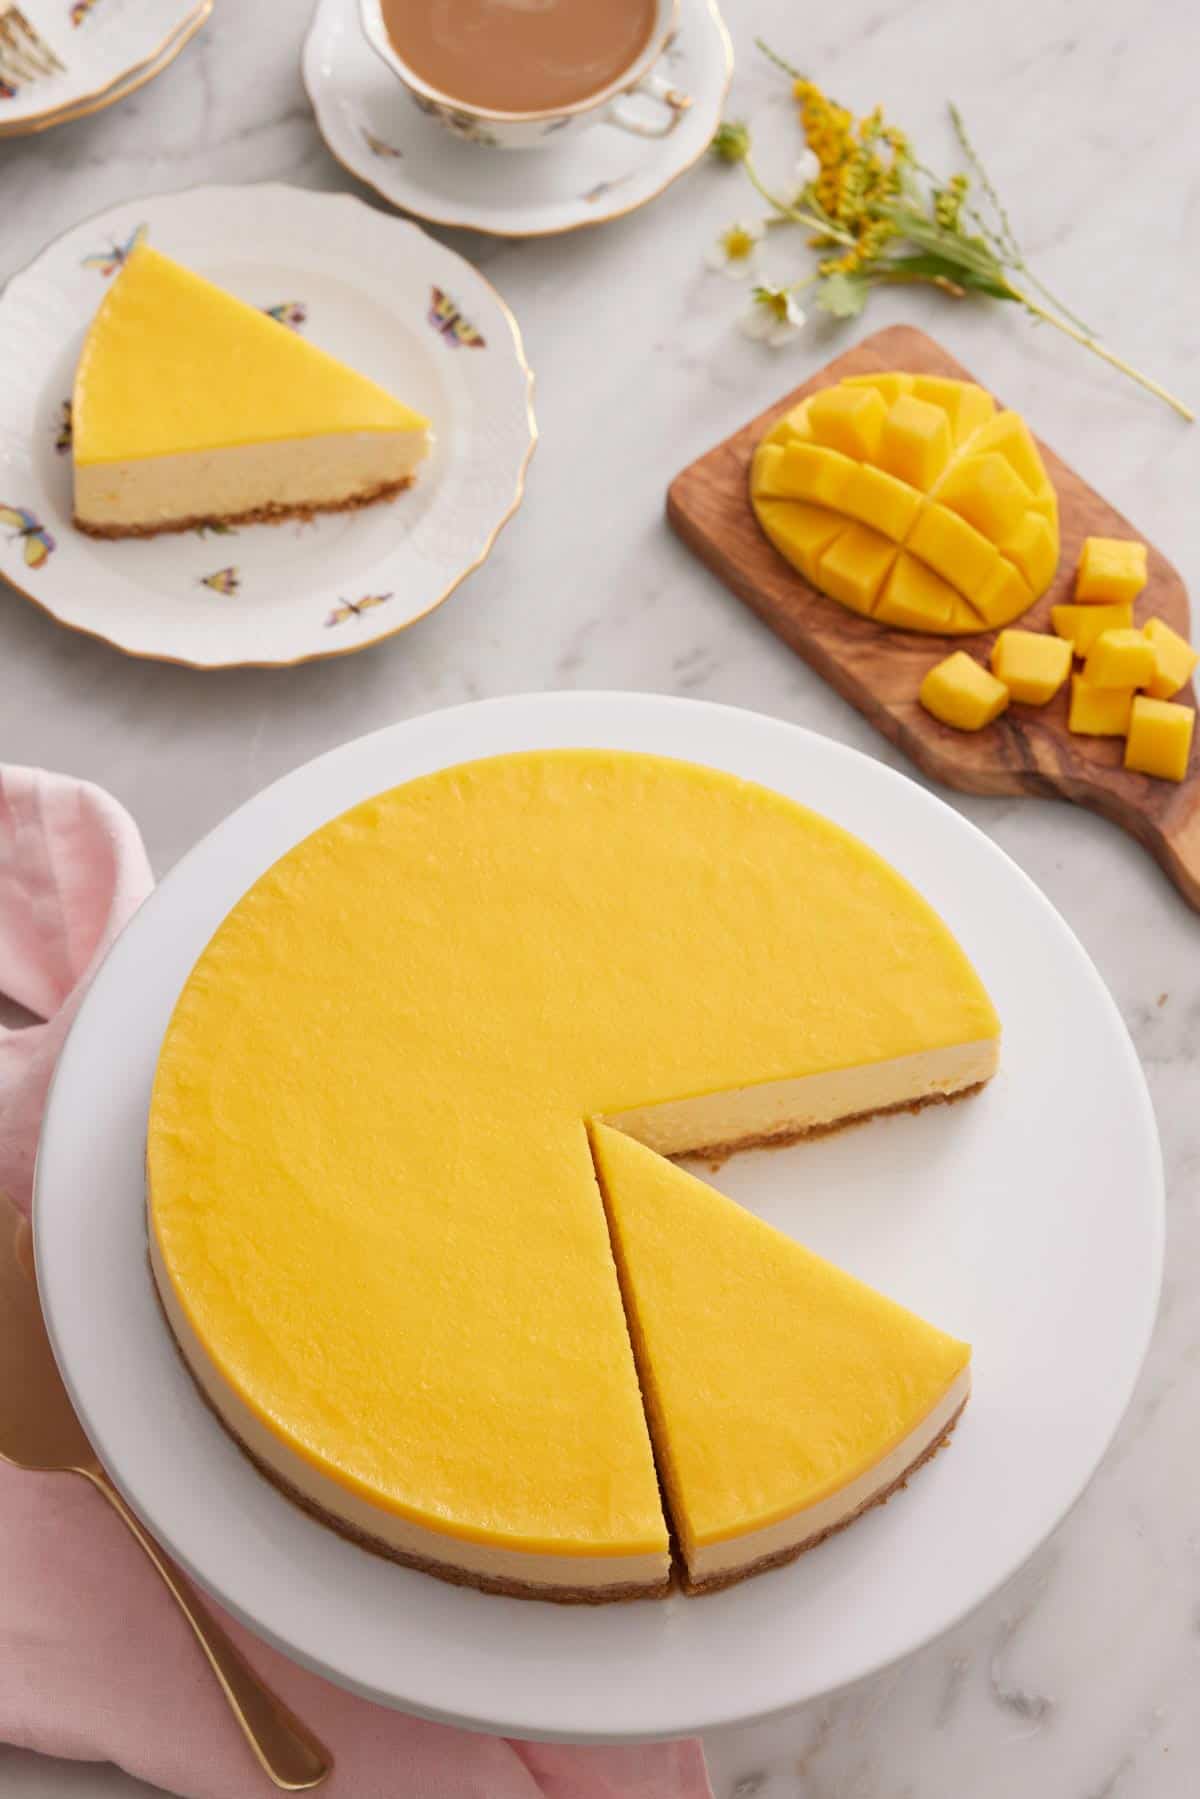 Overhead view of a mango cheesecake with one slice removed and one sliced cut. Plated slice in the background along with a diced mango.